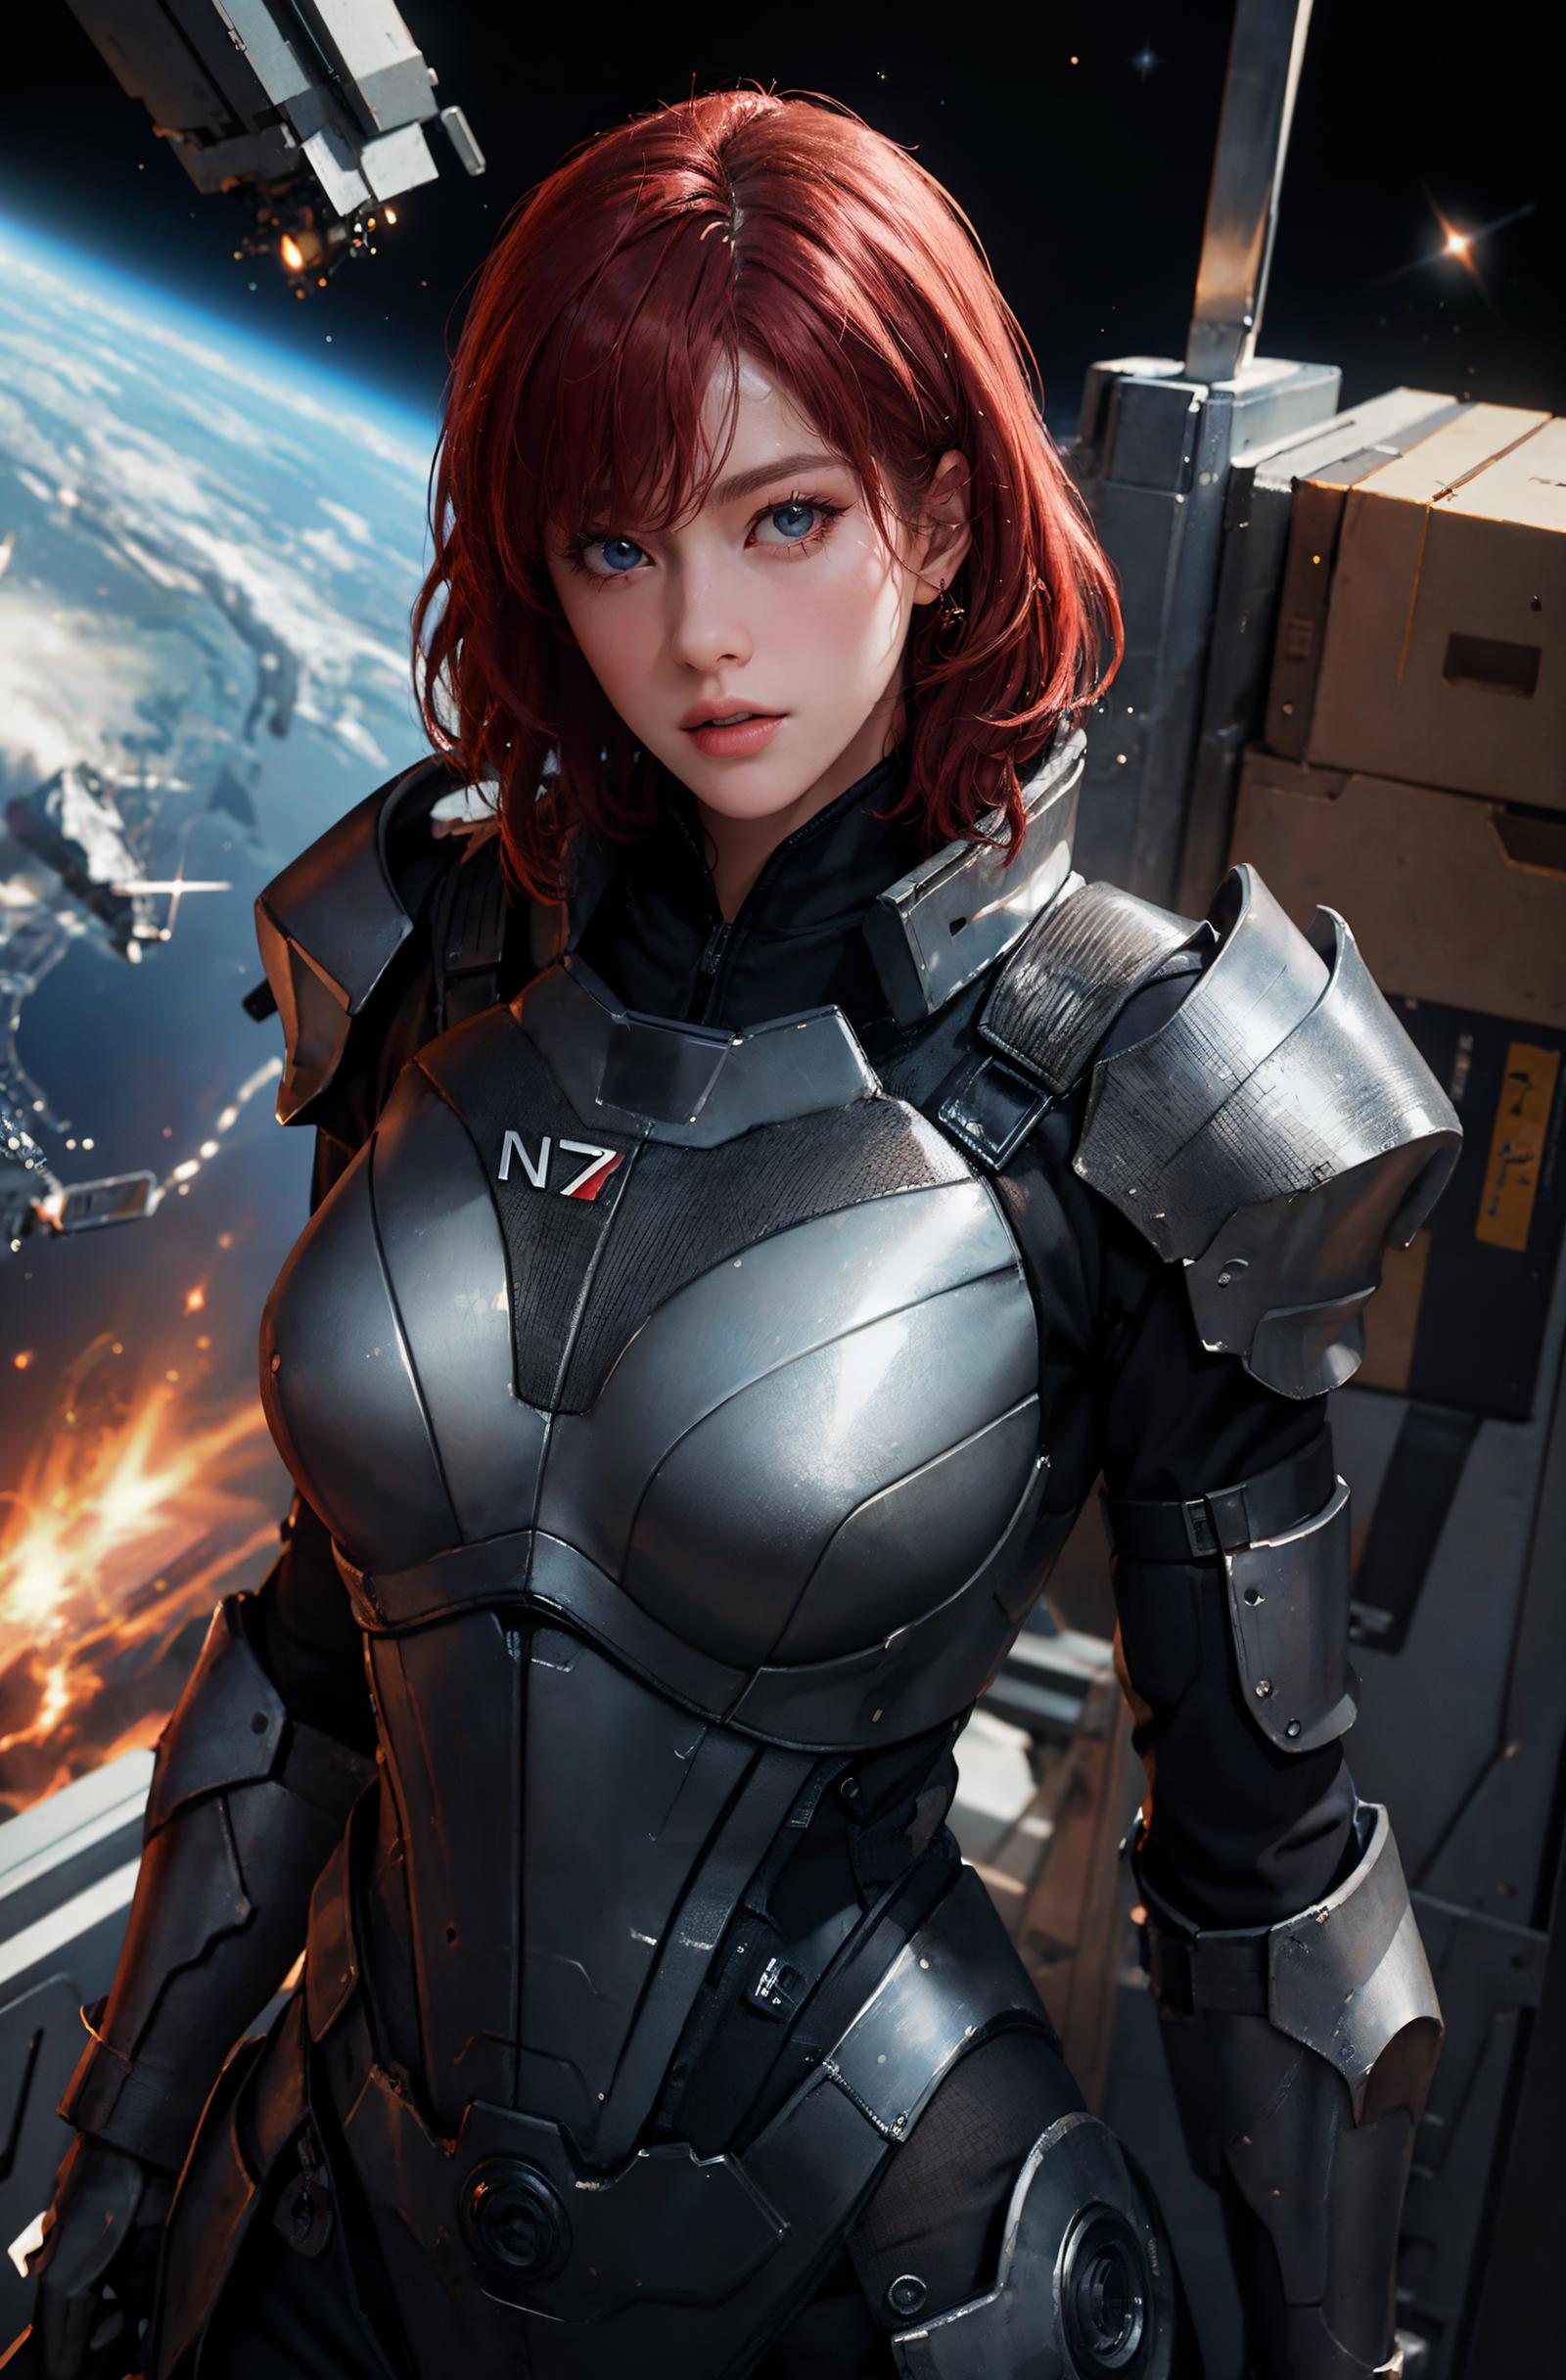 N7 Armor (Mass Effect) LoRA image by 2304470783935